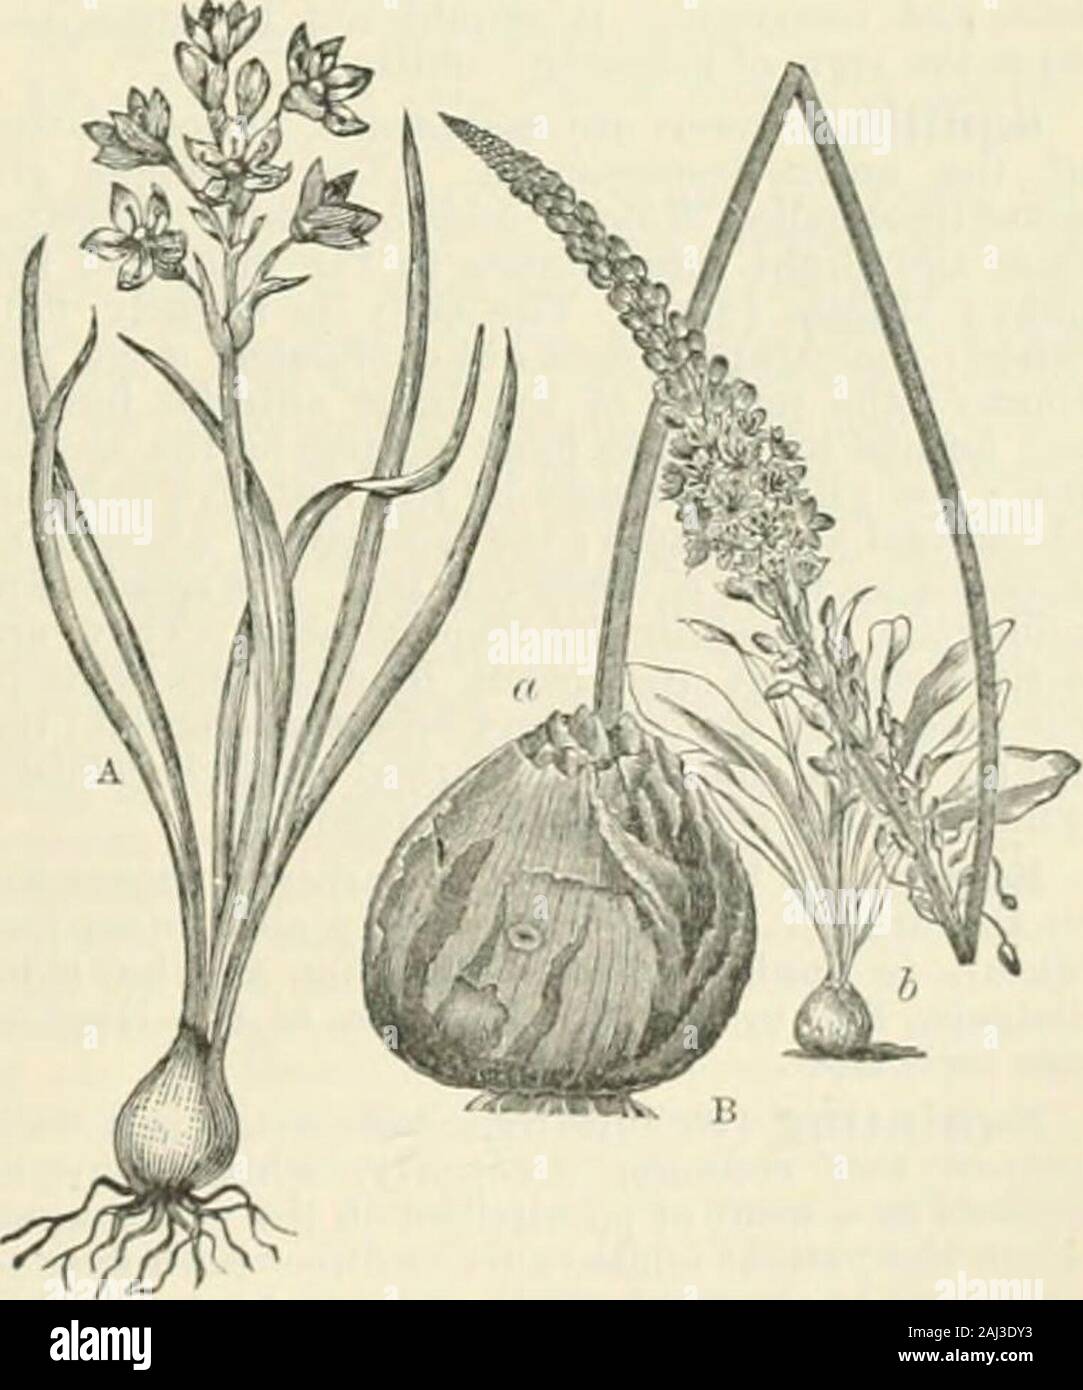 Chambers's encyclopaedia; a dictionary of universal knowledge . (Scilla), a genus of bulbous-rootedplants of the natural order Liliacea, with radi-cal leaves, and flowers in terminal racemes orloose corymbs. The species, which are numer-ous, are natives chiefly of the Mediterraneanand Caucasian regions. Three are natives ofBritain, S. verna, which is abundant on theeast coast of Ireland, the west and north coastsof Scotland, more sparingly on the east coastof Scotland, and very locally in north-easternEngland ; .S. aiitumnalis, which is confined to someof the southern counties of England ; and Stock Photo